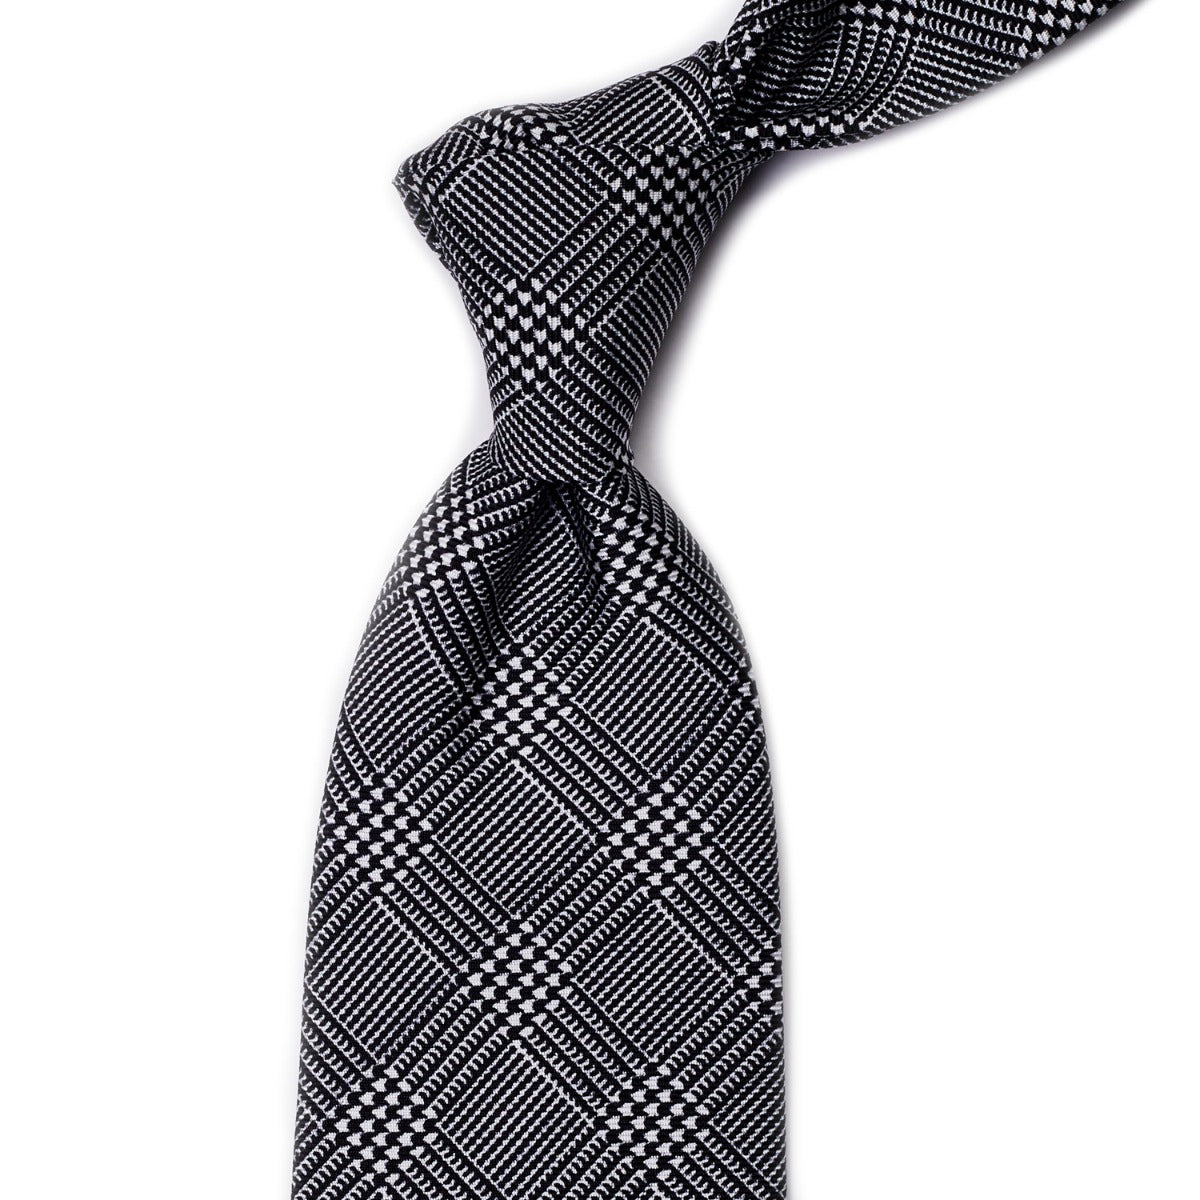 A Sovereign Grade Black Prince of Wales Check Tie, part of Kirby Allison.com's ties collection, on a white background.